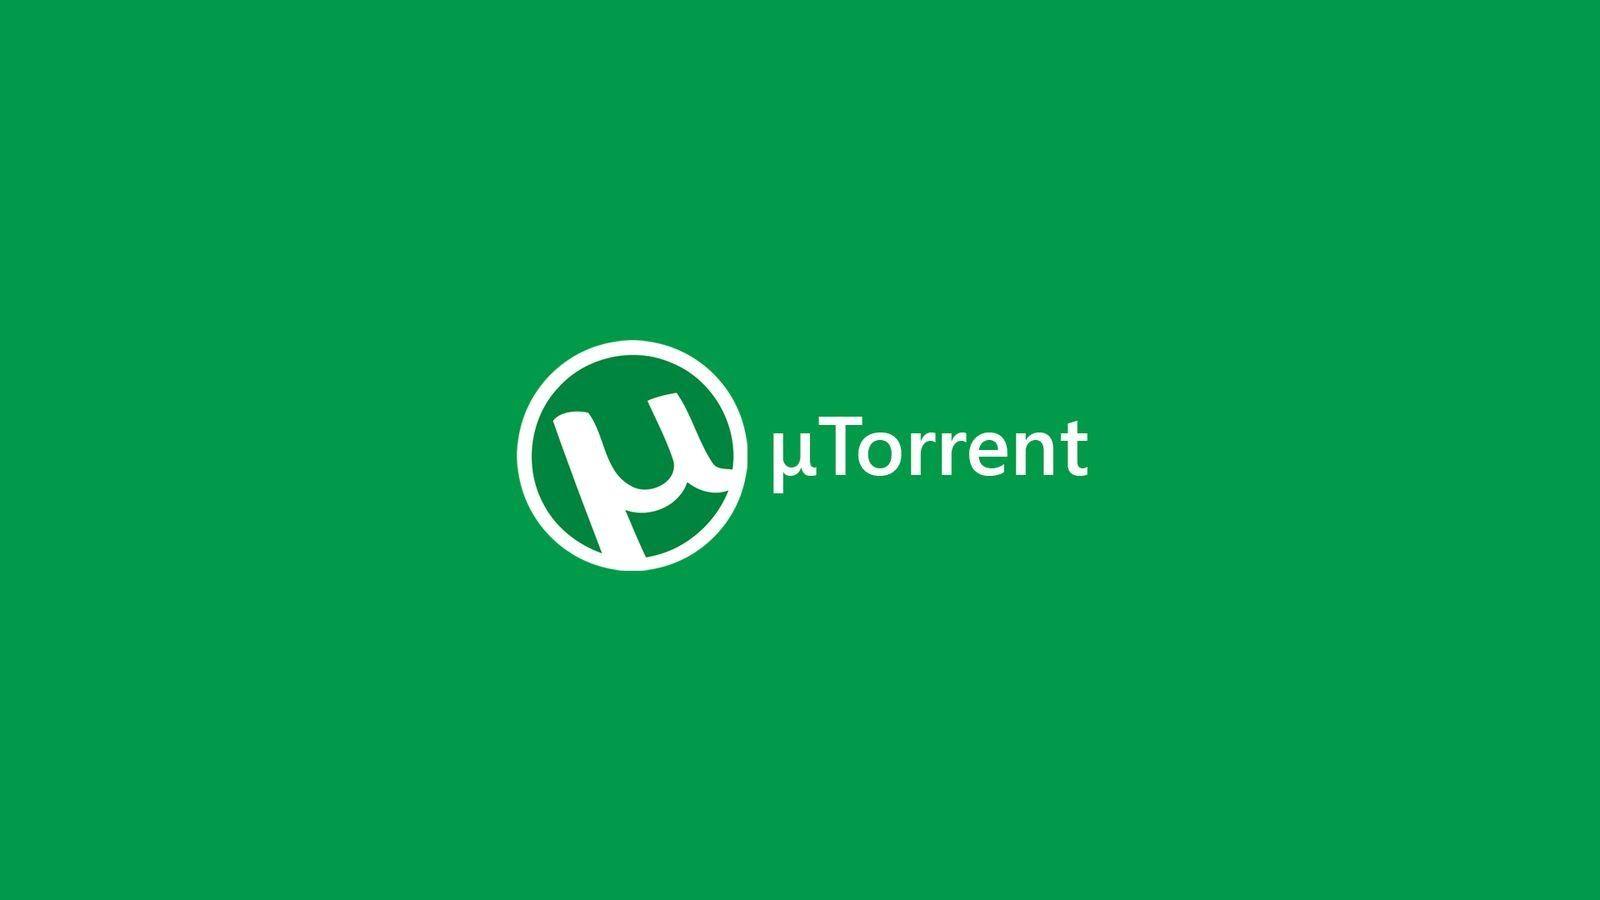 uTorrent Now Has Its Own Game Store Built Right into the Torrent